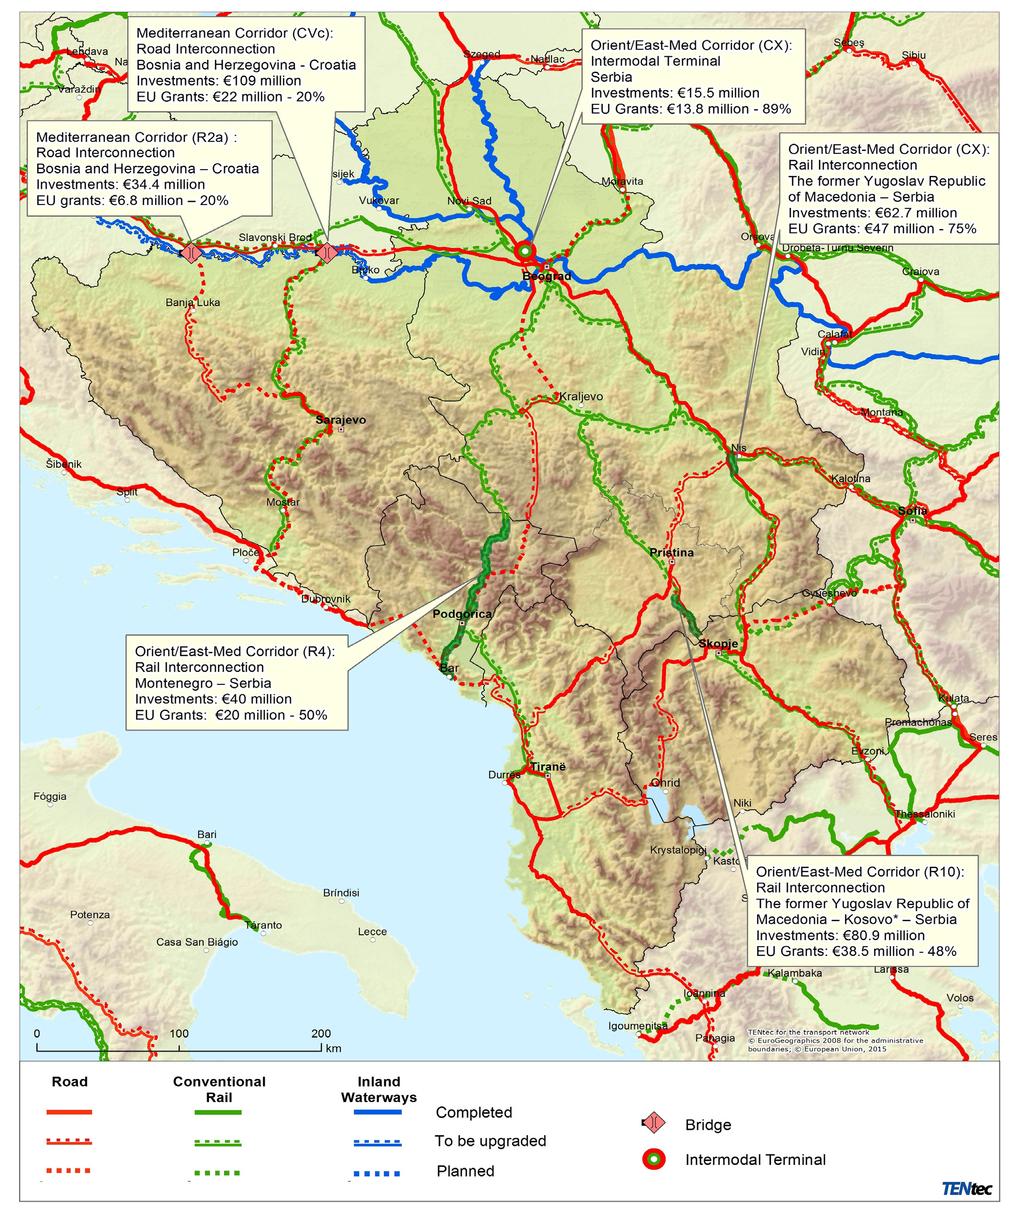 Regional Core Transport Network 2015 Investment Projects Co-financed through the Instrument for Pre-accession Assistance/ Western Balkans Investment Framework1 2 1 2 Subject to a final decision by